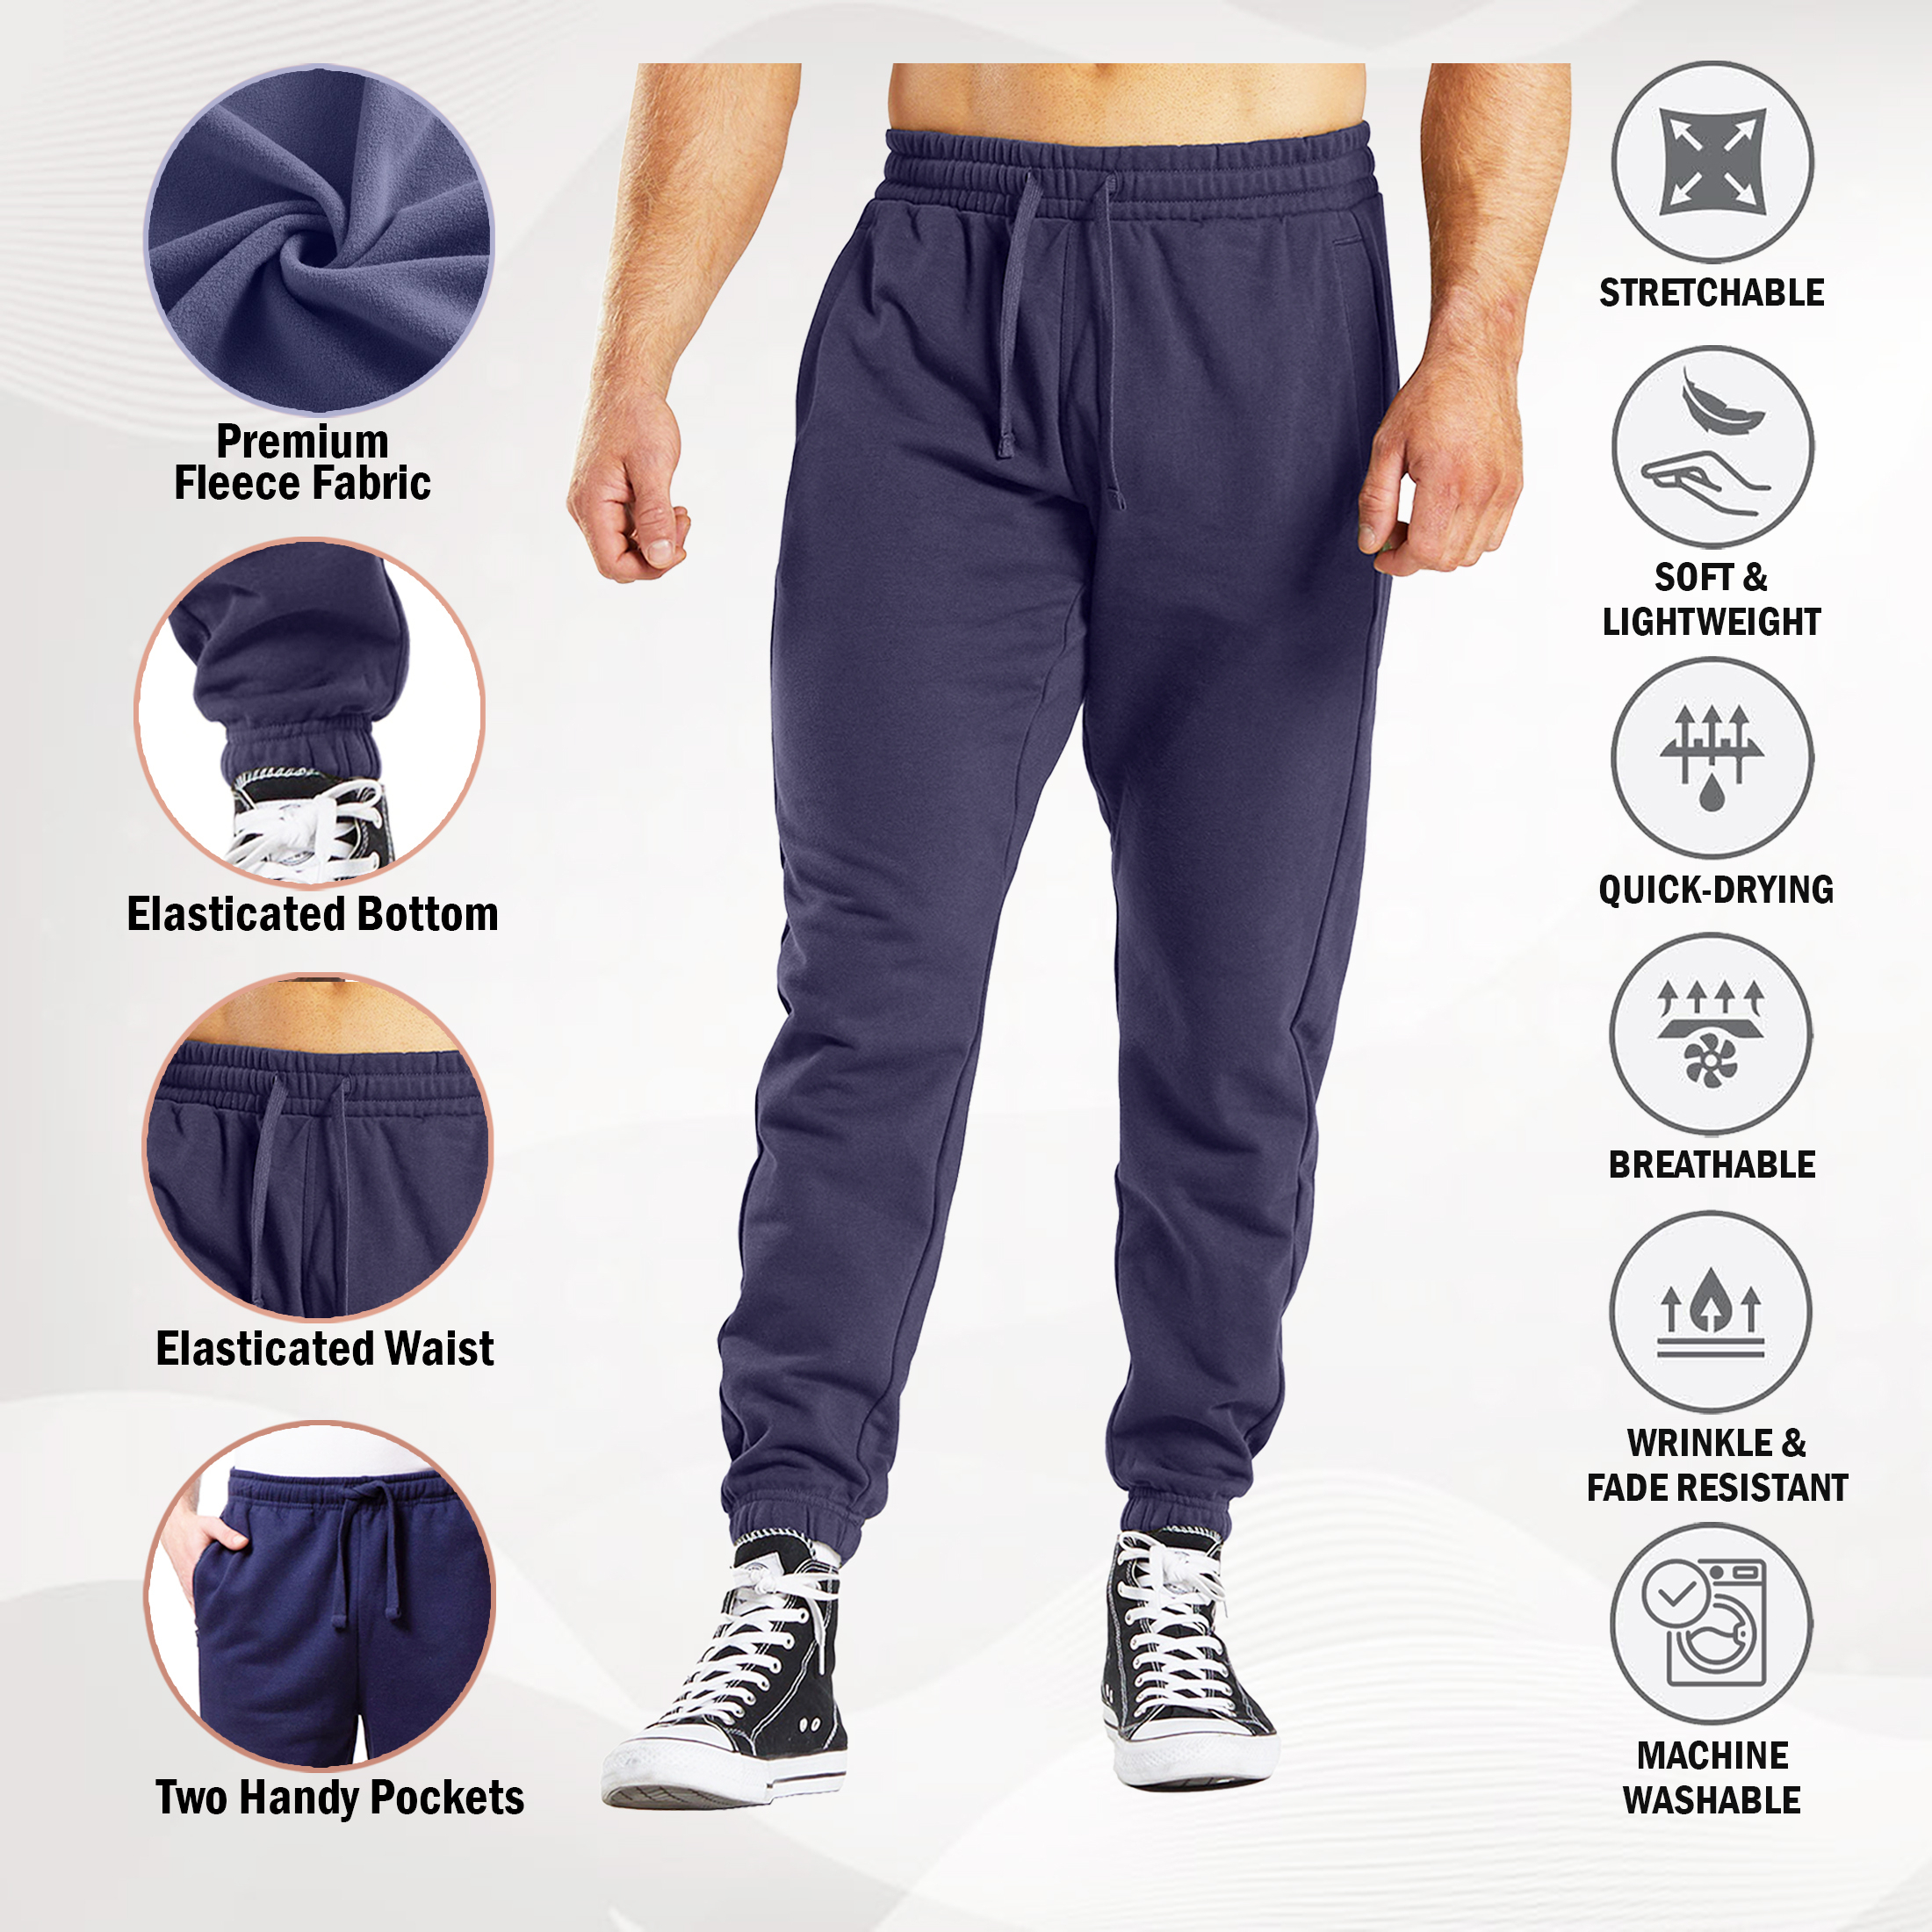 3-Pack: Men's Casual Fleece-Lined Elastic Bottom Sweatpants Jogger Pants With Pockets - Solid, Small